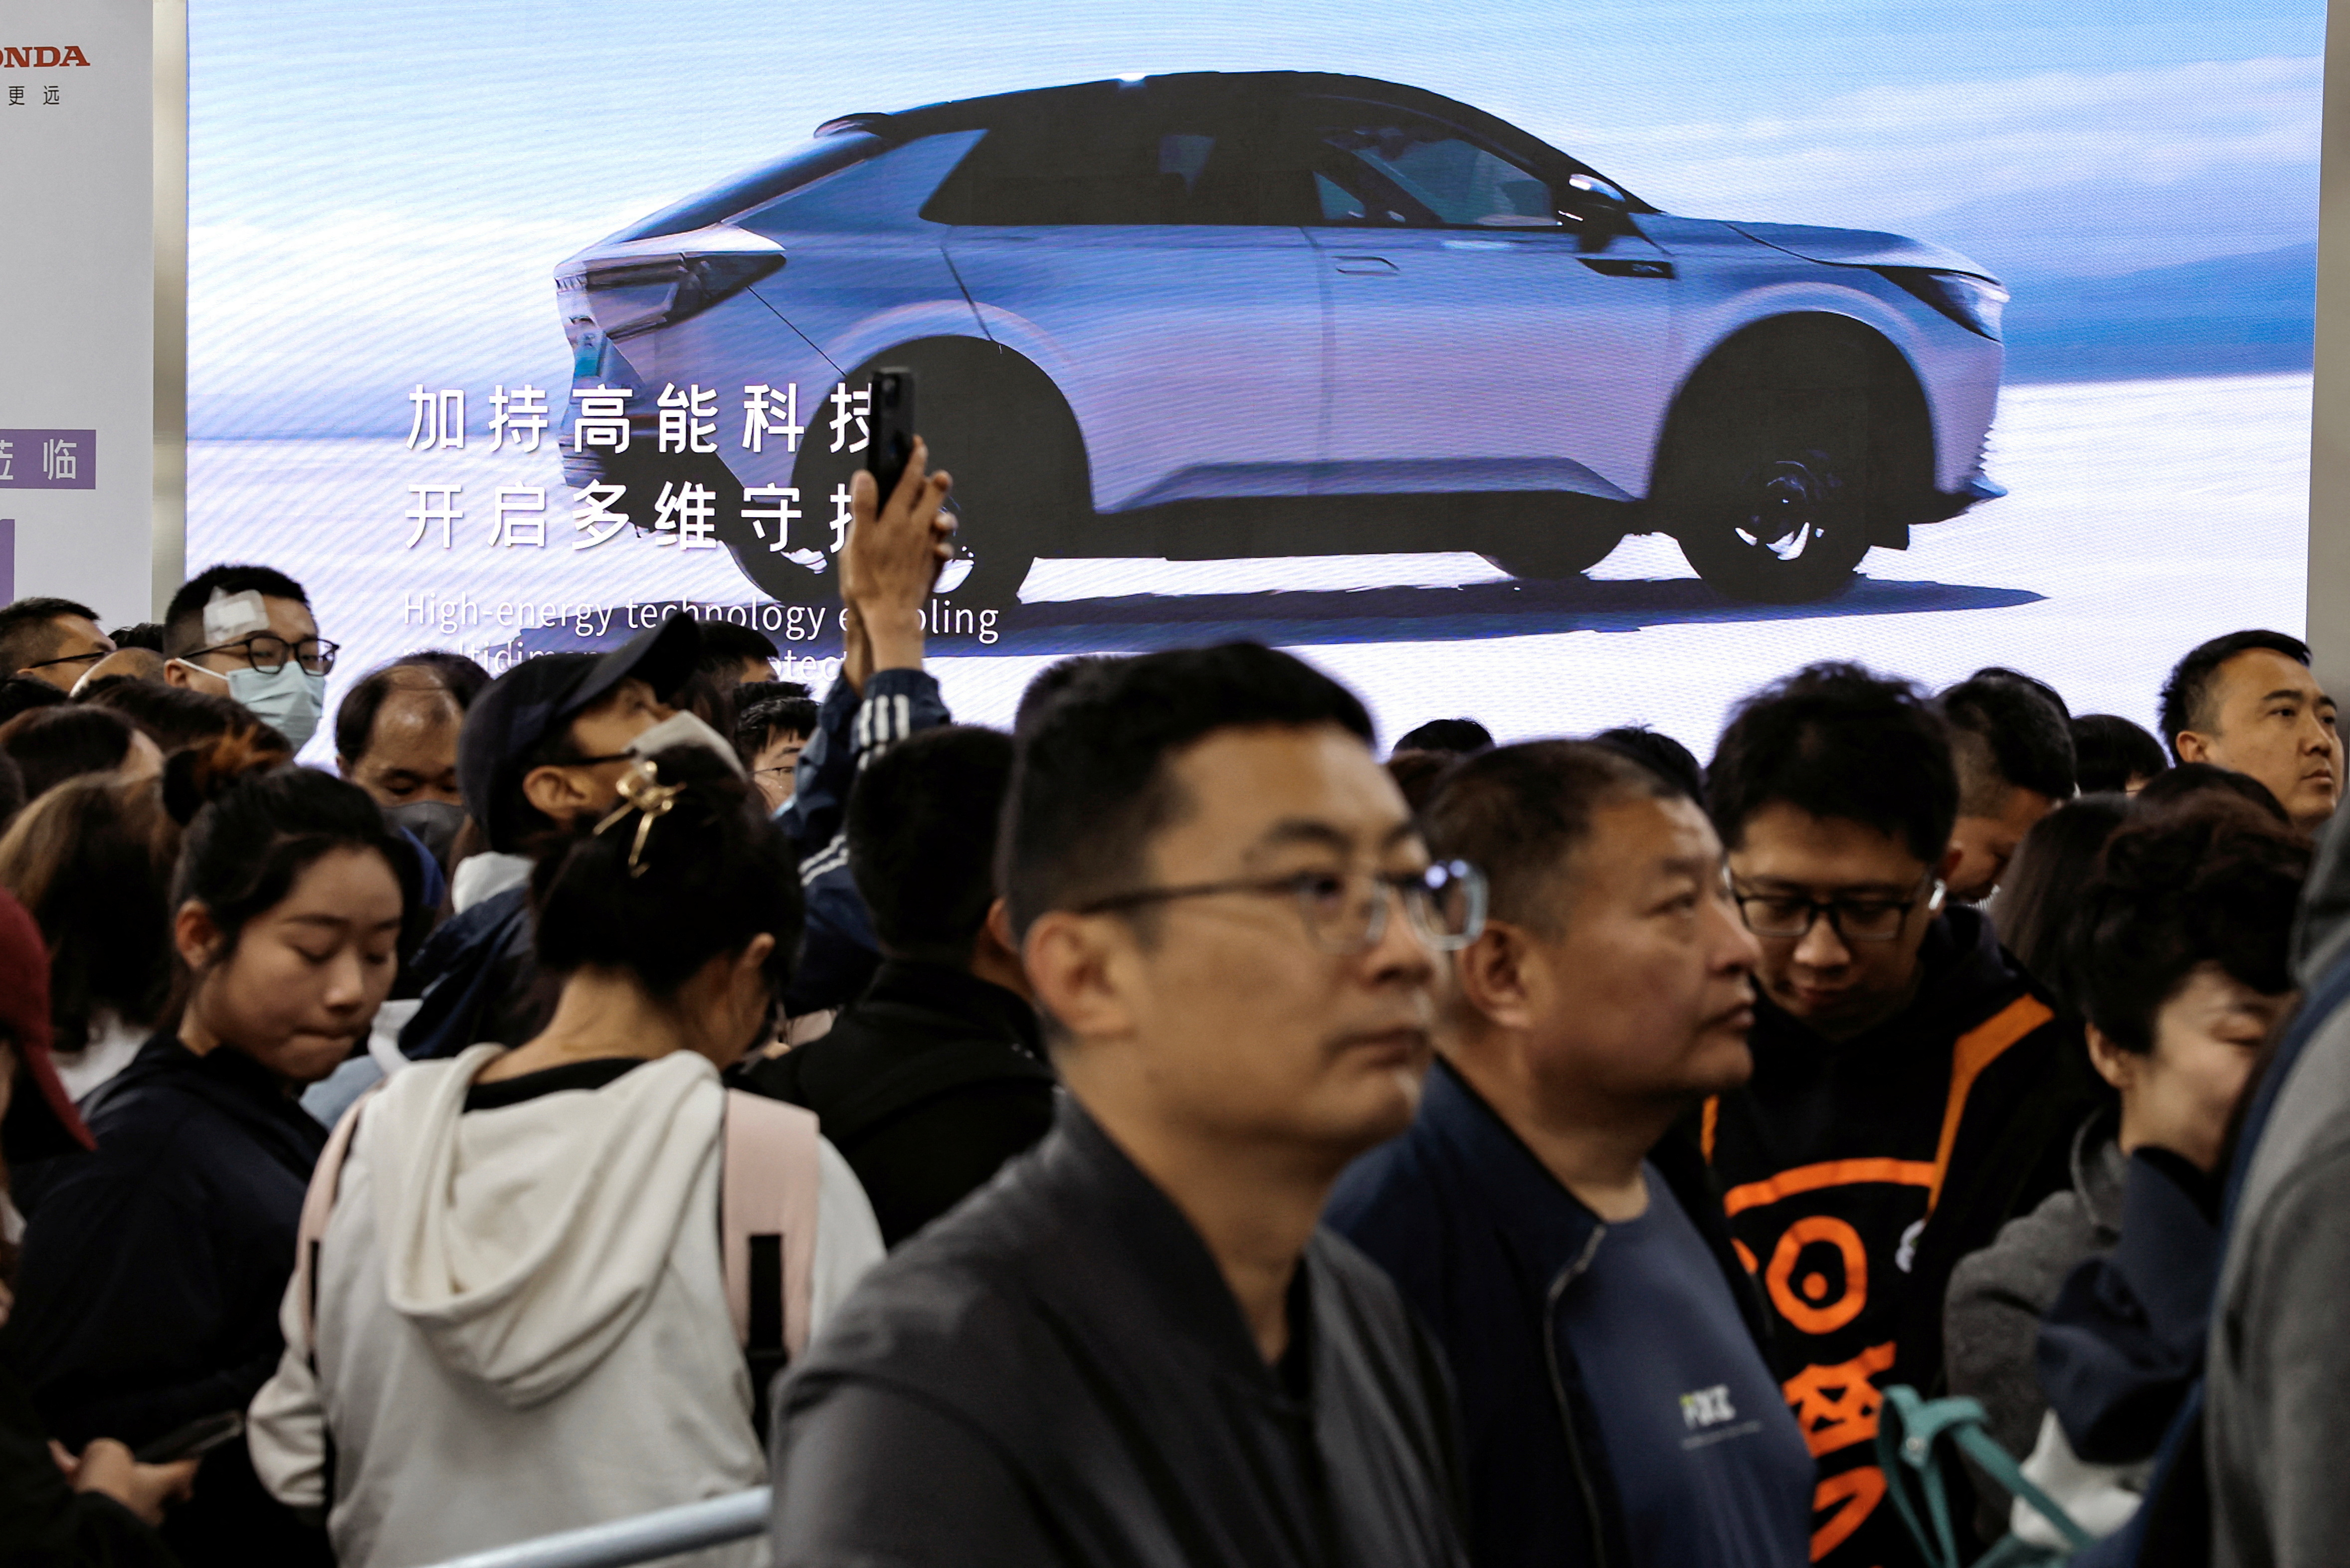 Visitors line up near a billboard of Honda's electric vehicle, at the Beijing International Automotive Exhibition